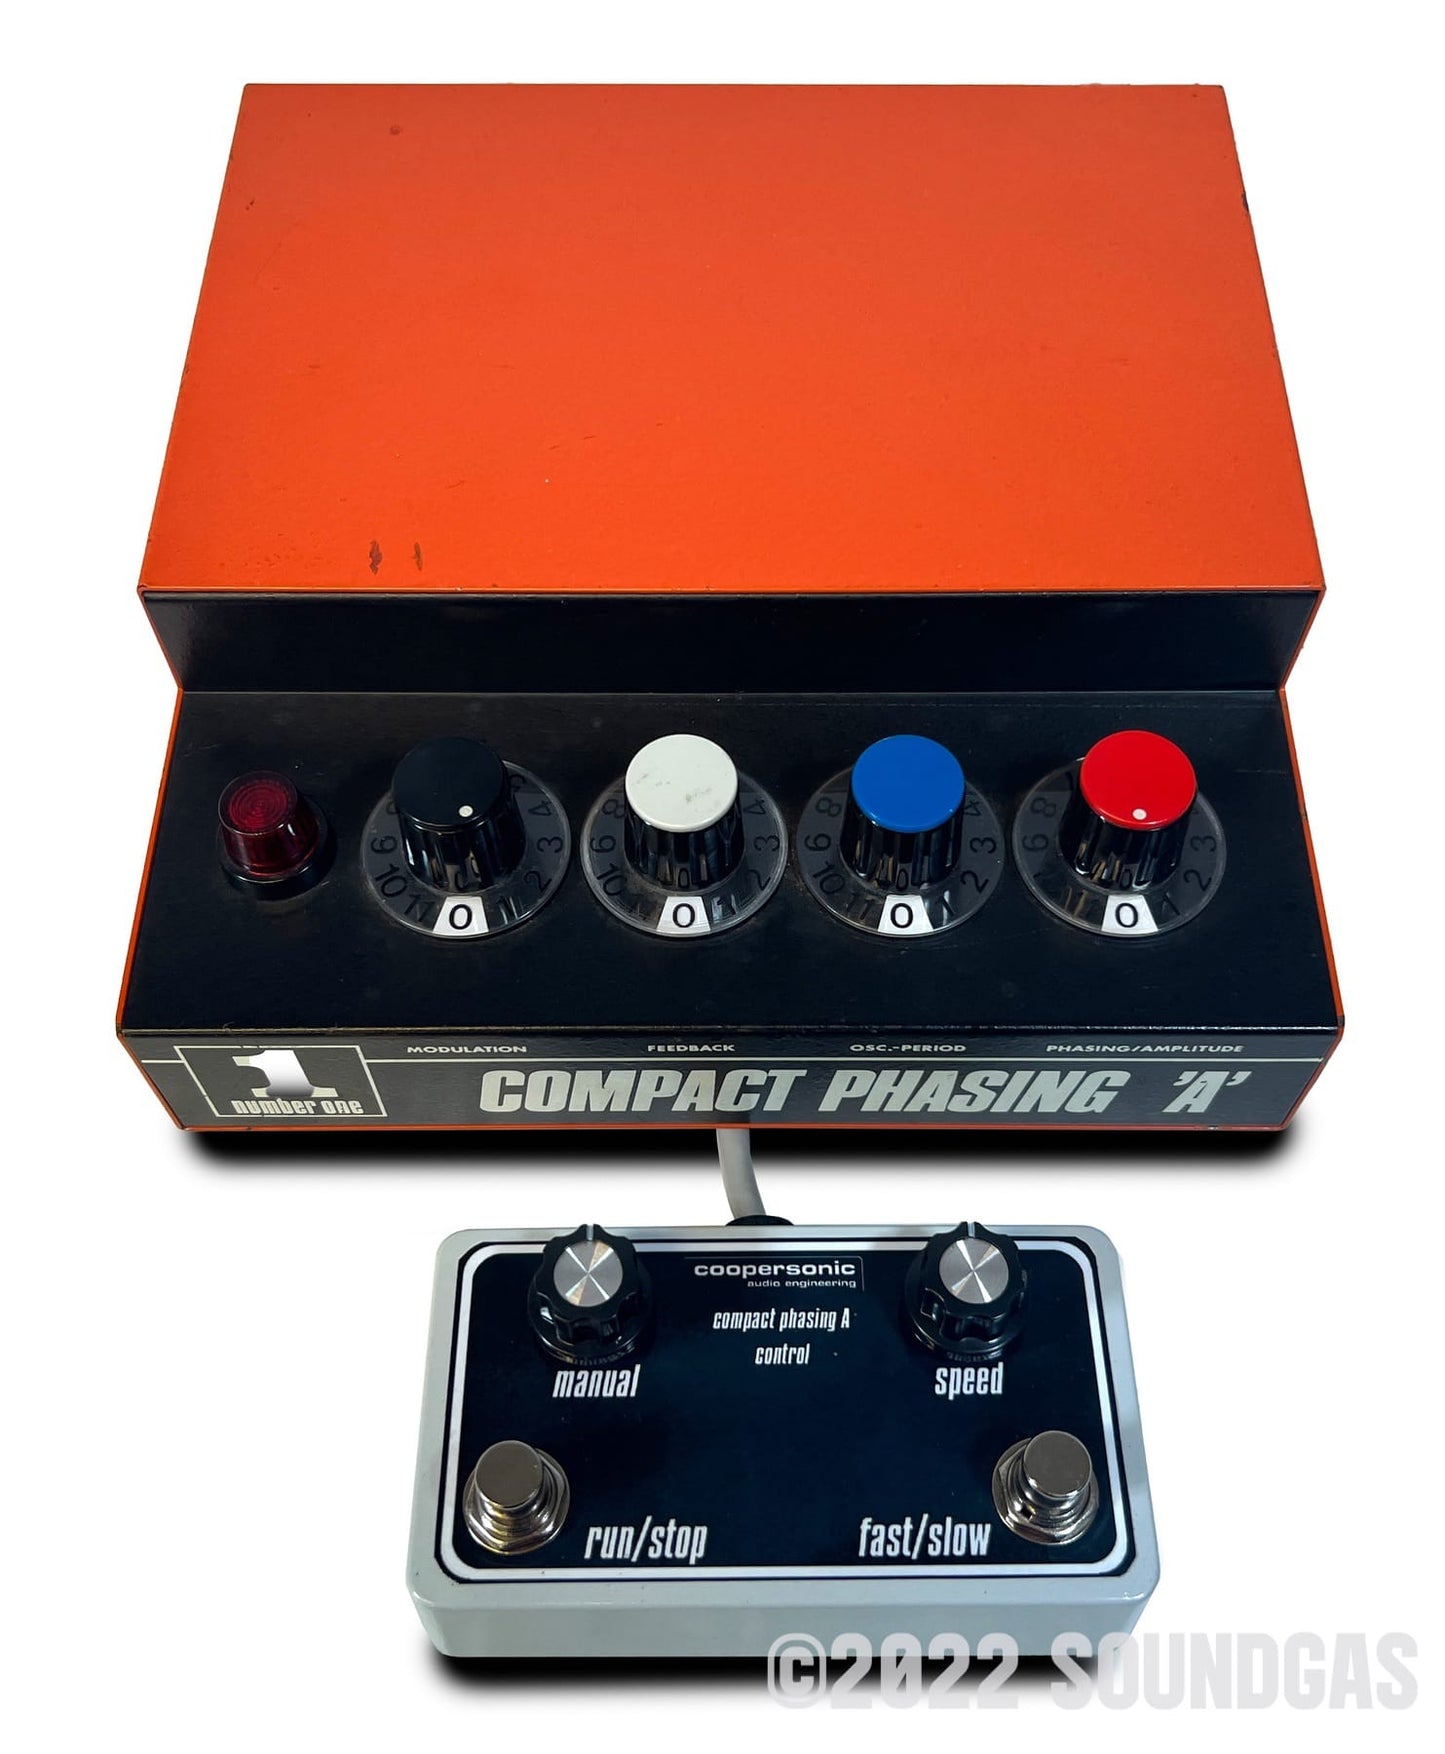 Schulte Compact Phasing 'A' & Custom Controller